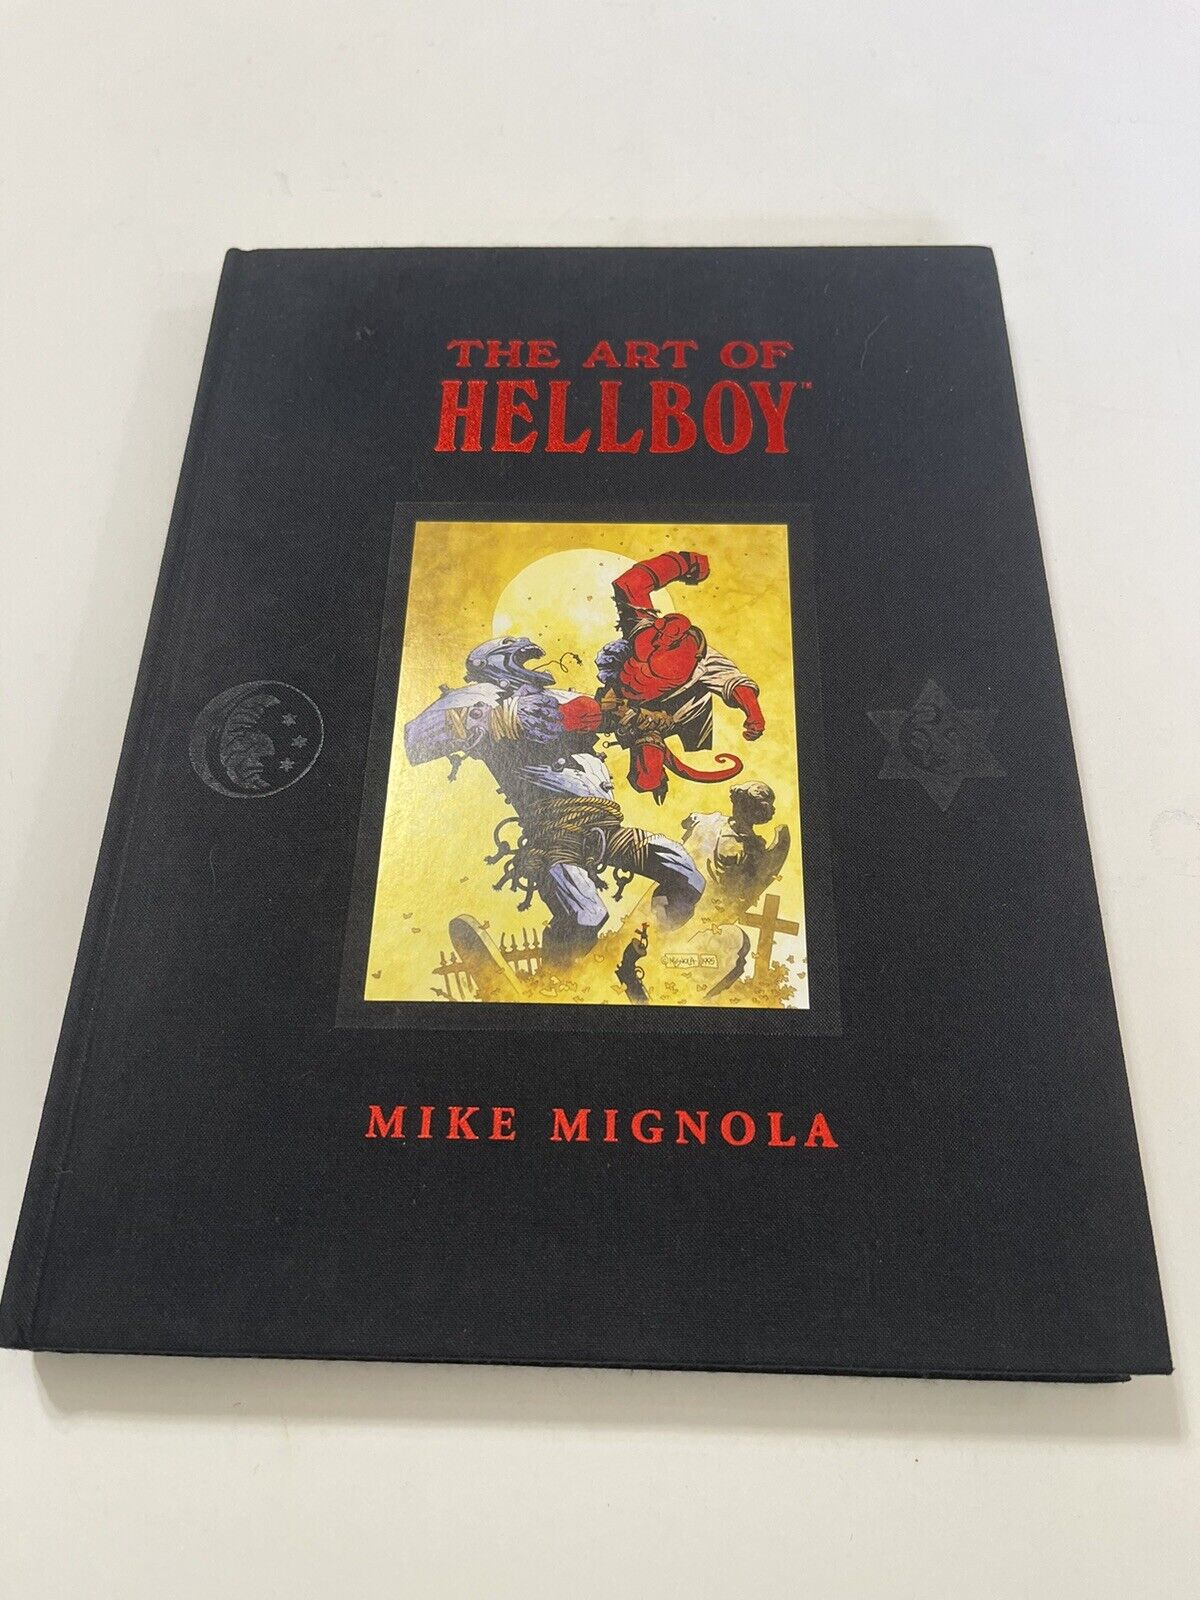 THE ART OF HELLBOY HARDCOVER BY MIKE MIGNOLA LARGE AMAZING RARE OOP BOOK